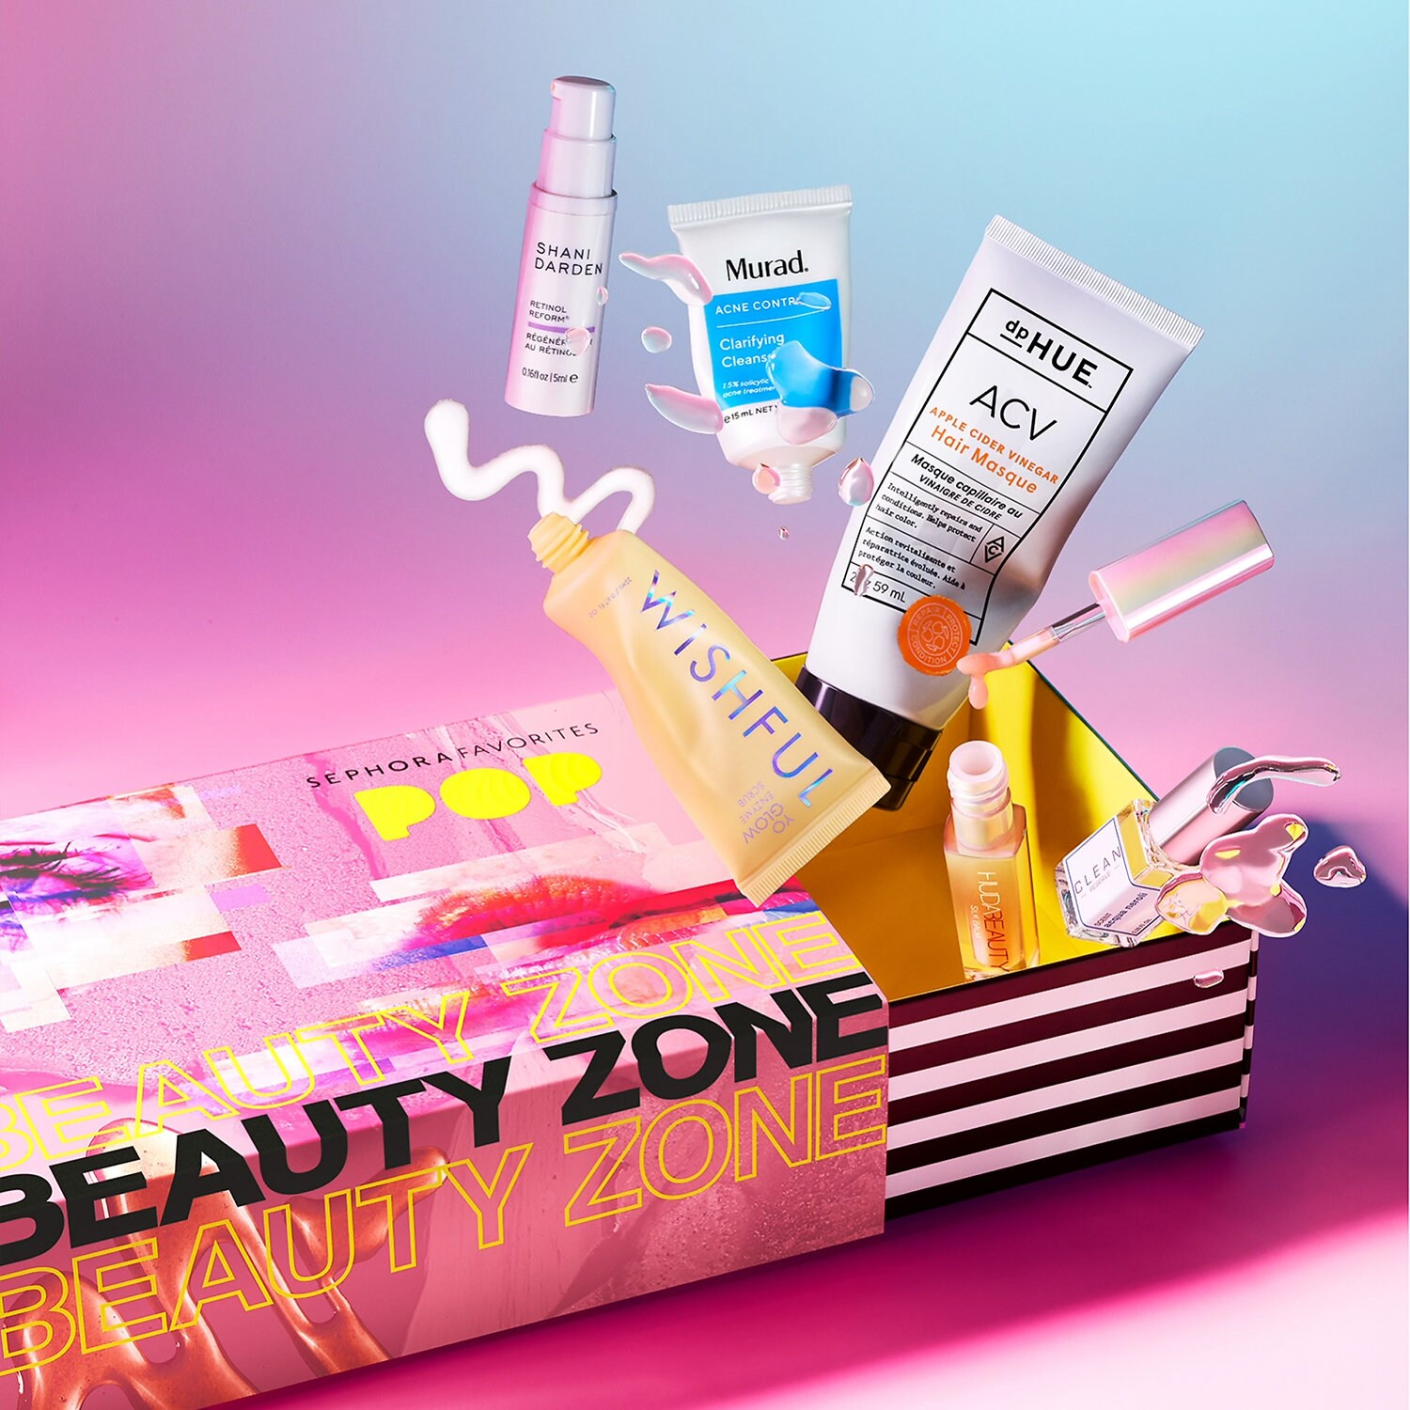 Play! by Sephora Reviews Get All The Details At Hello Subscription!